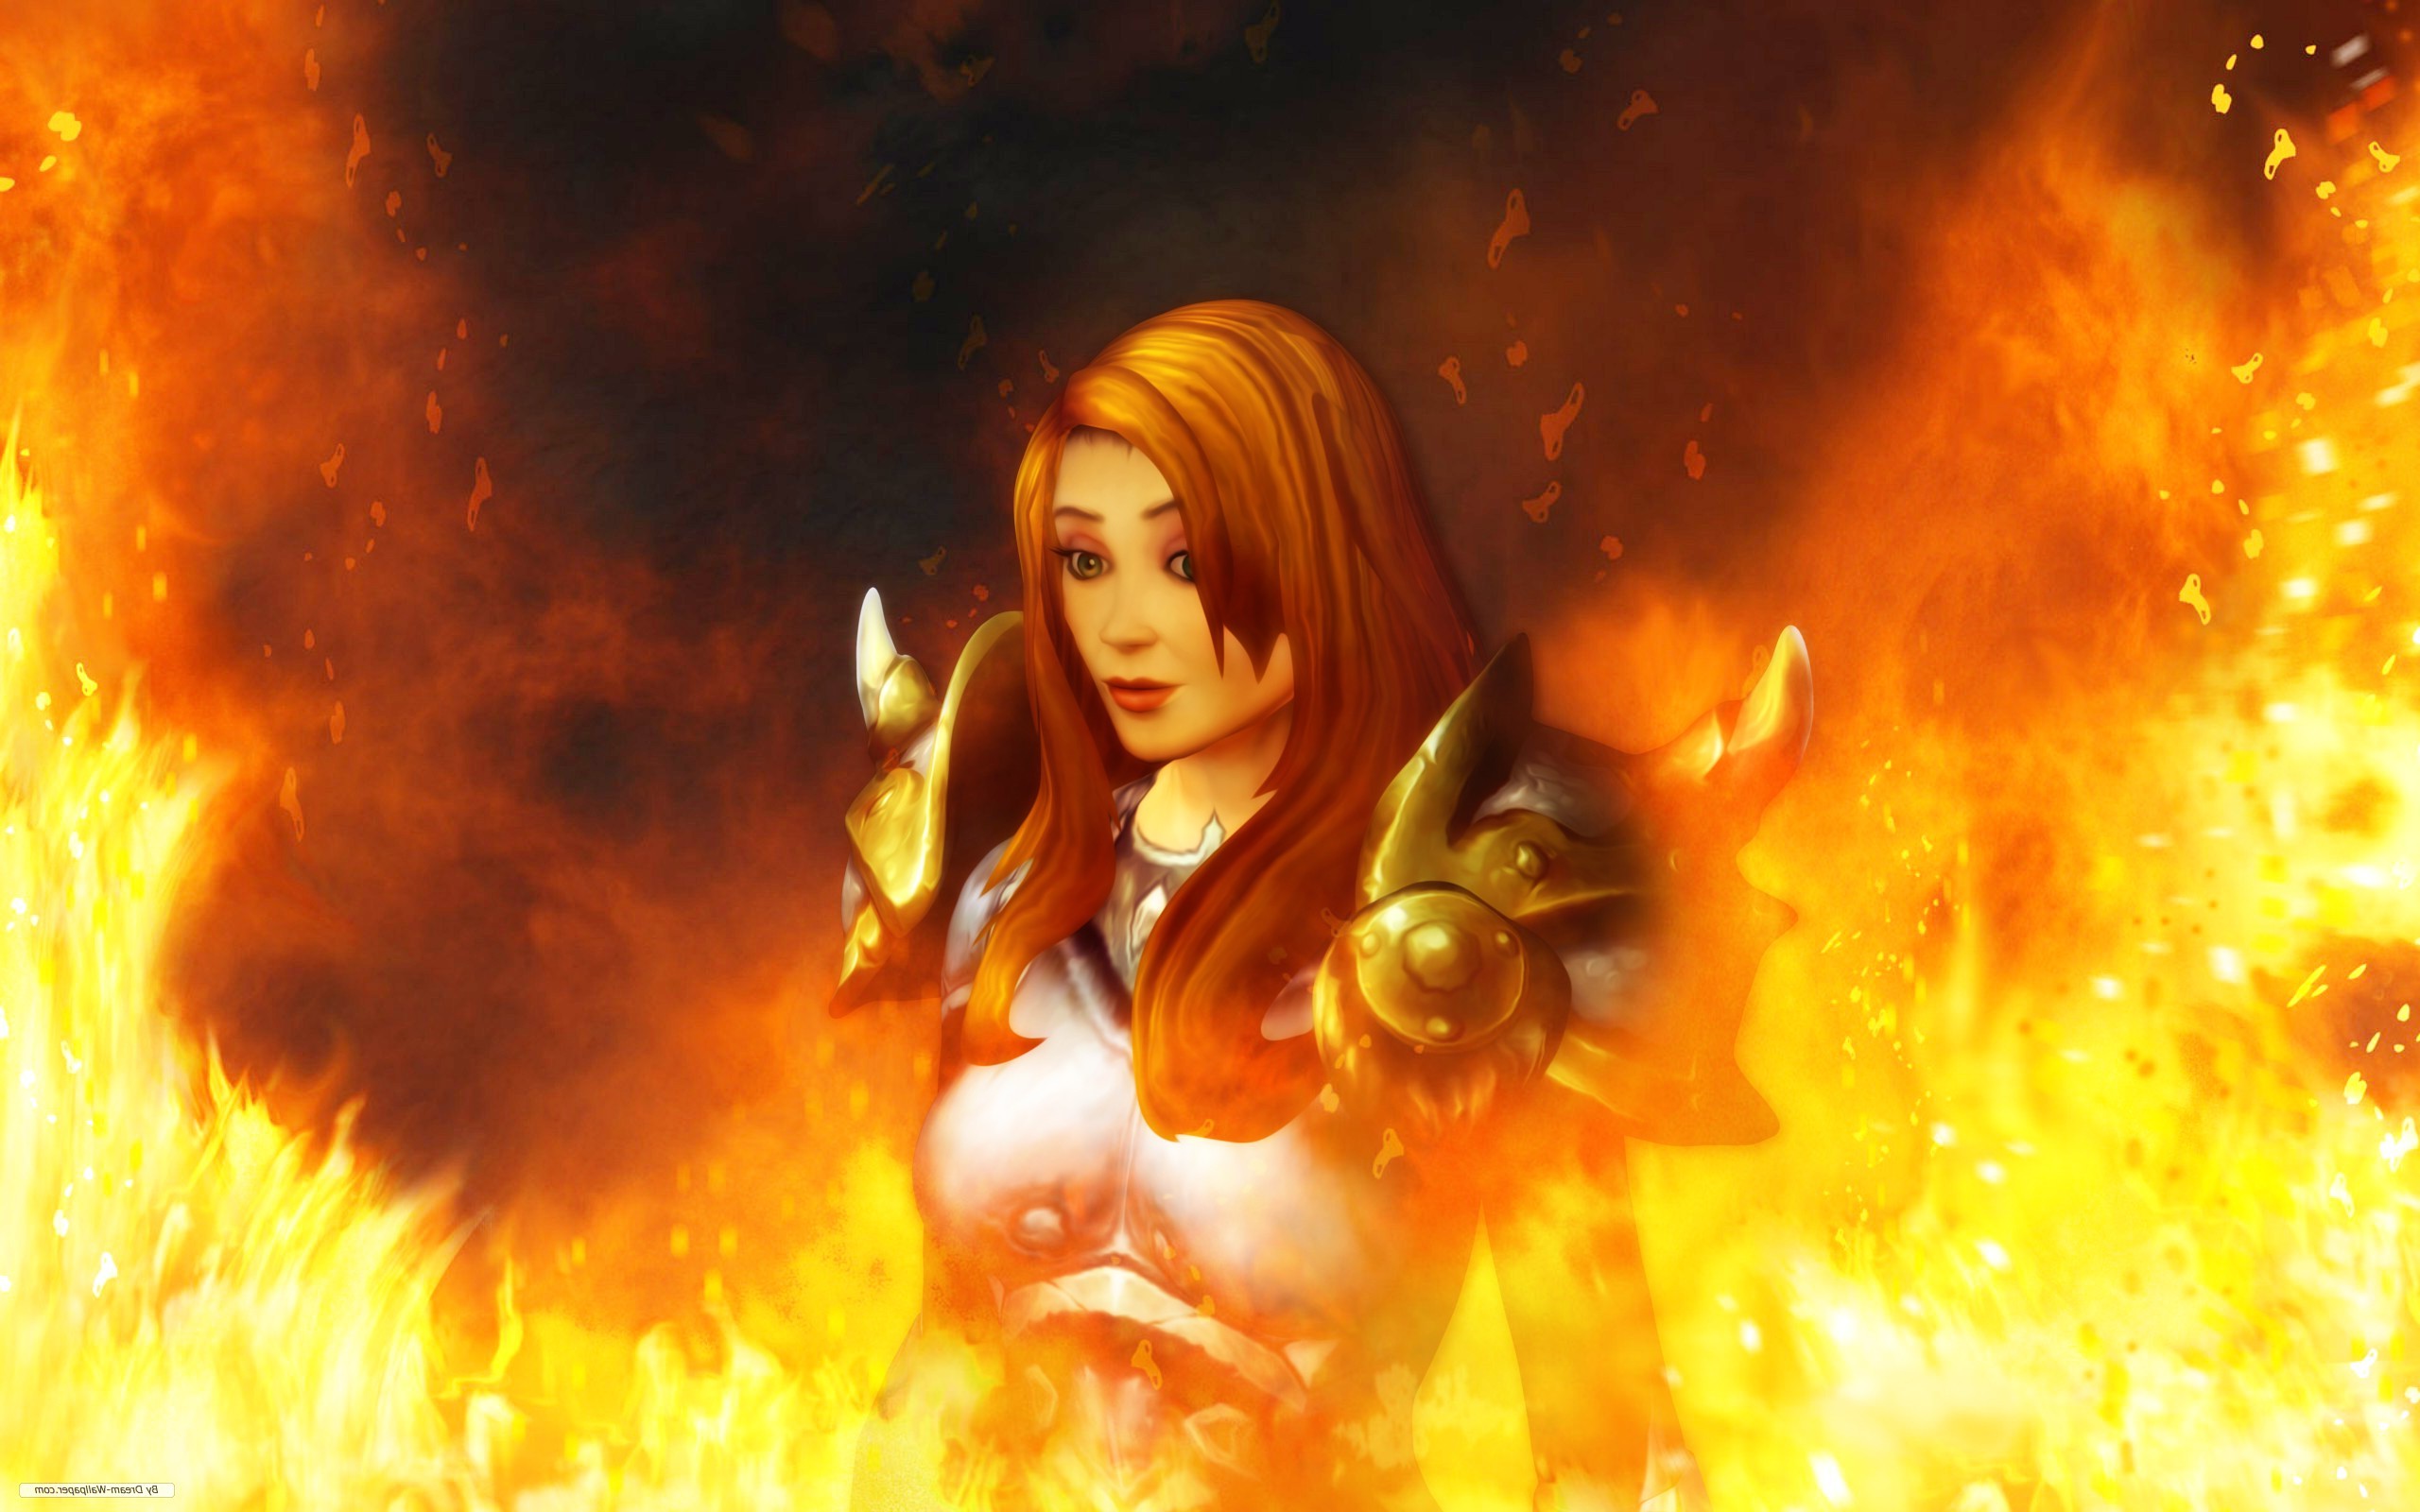 Cinema 4D, Photoshopped, World Of Warcraft: Warlords Of Draenor, Fire Wallpaper